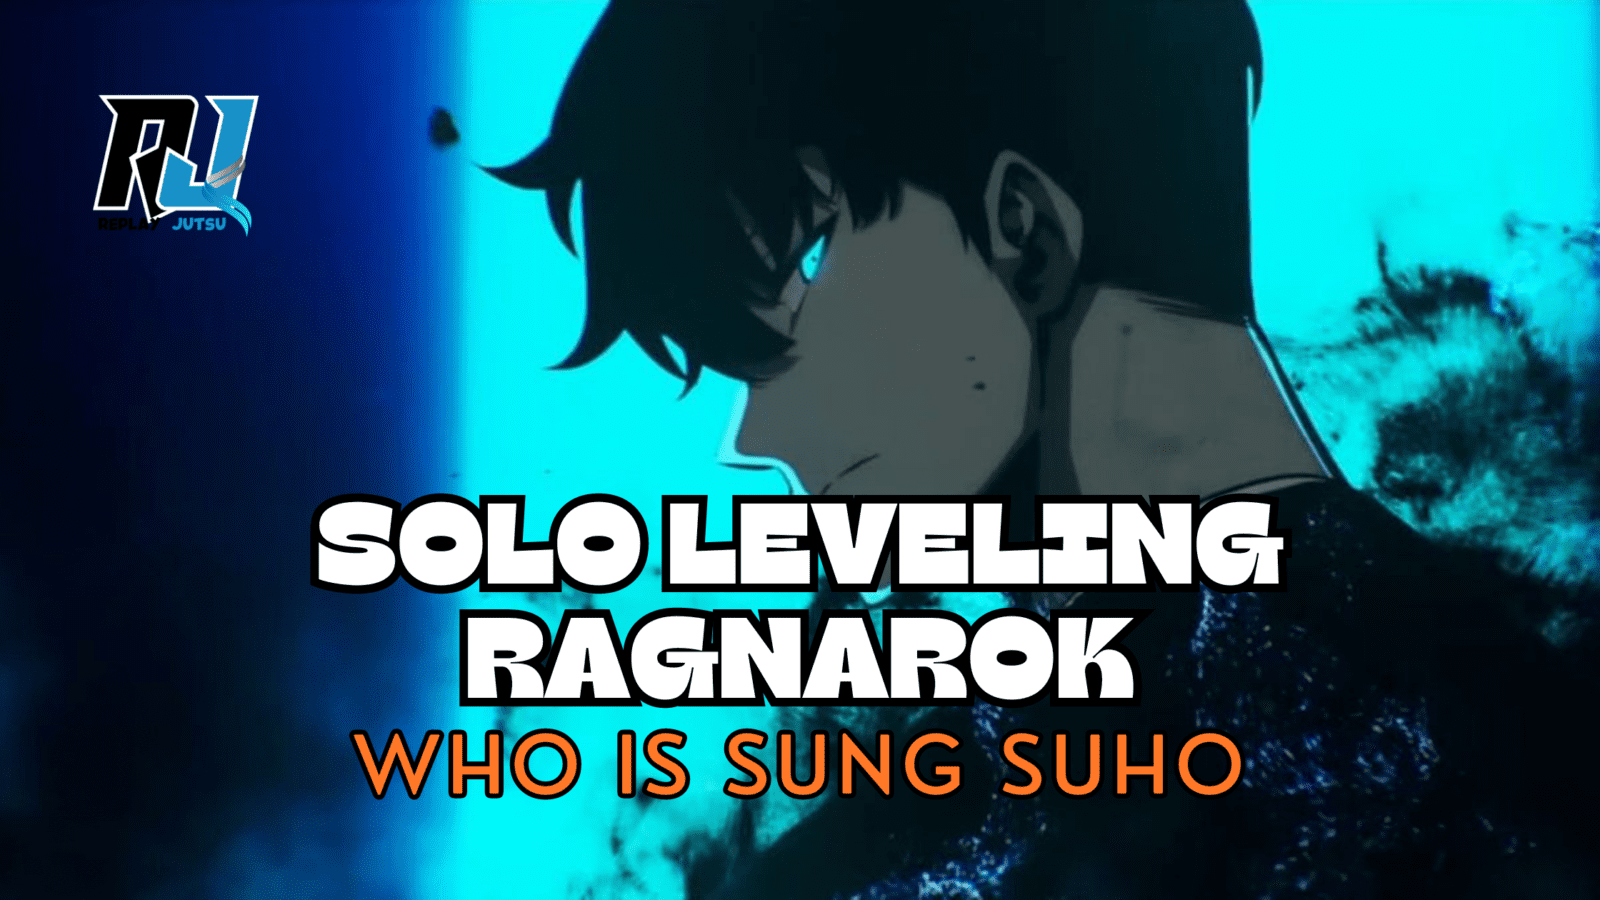 Who is Sung Suho in Solo Leveling Ragnarok?